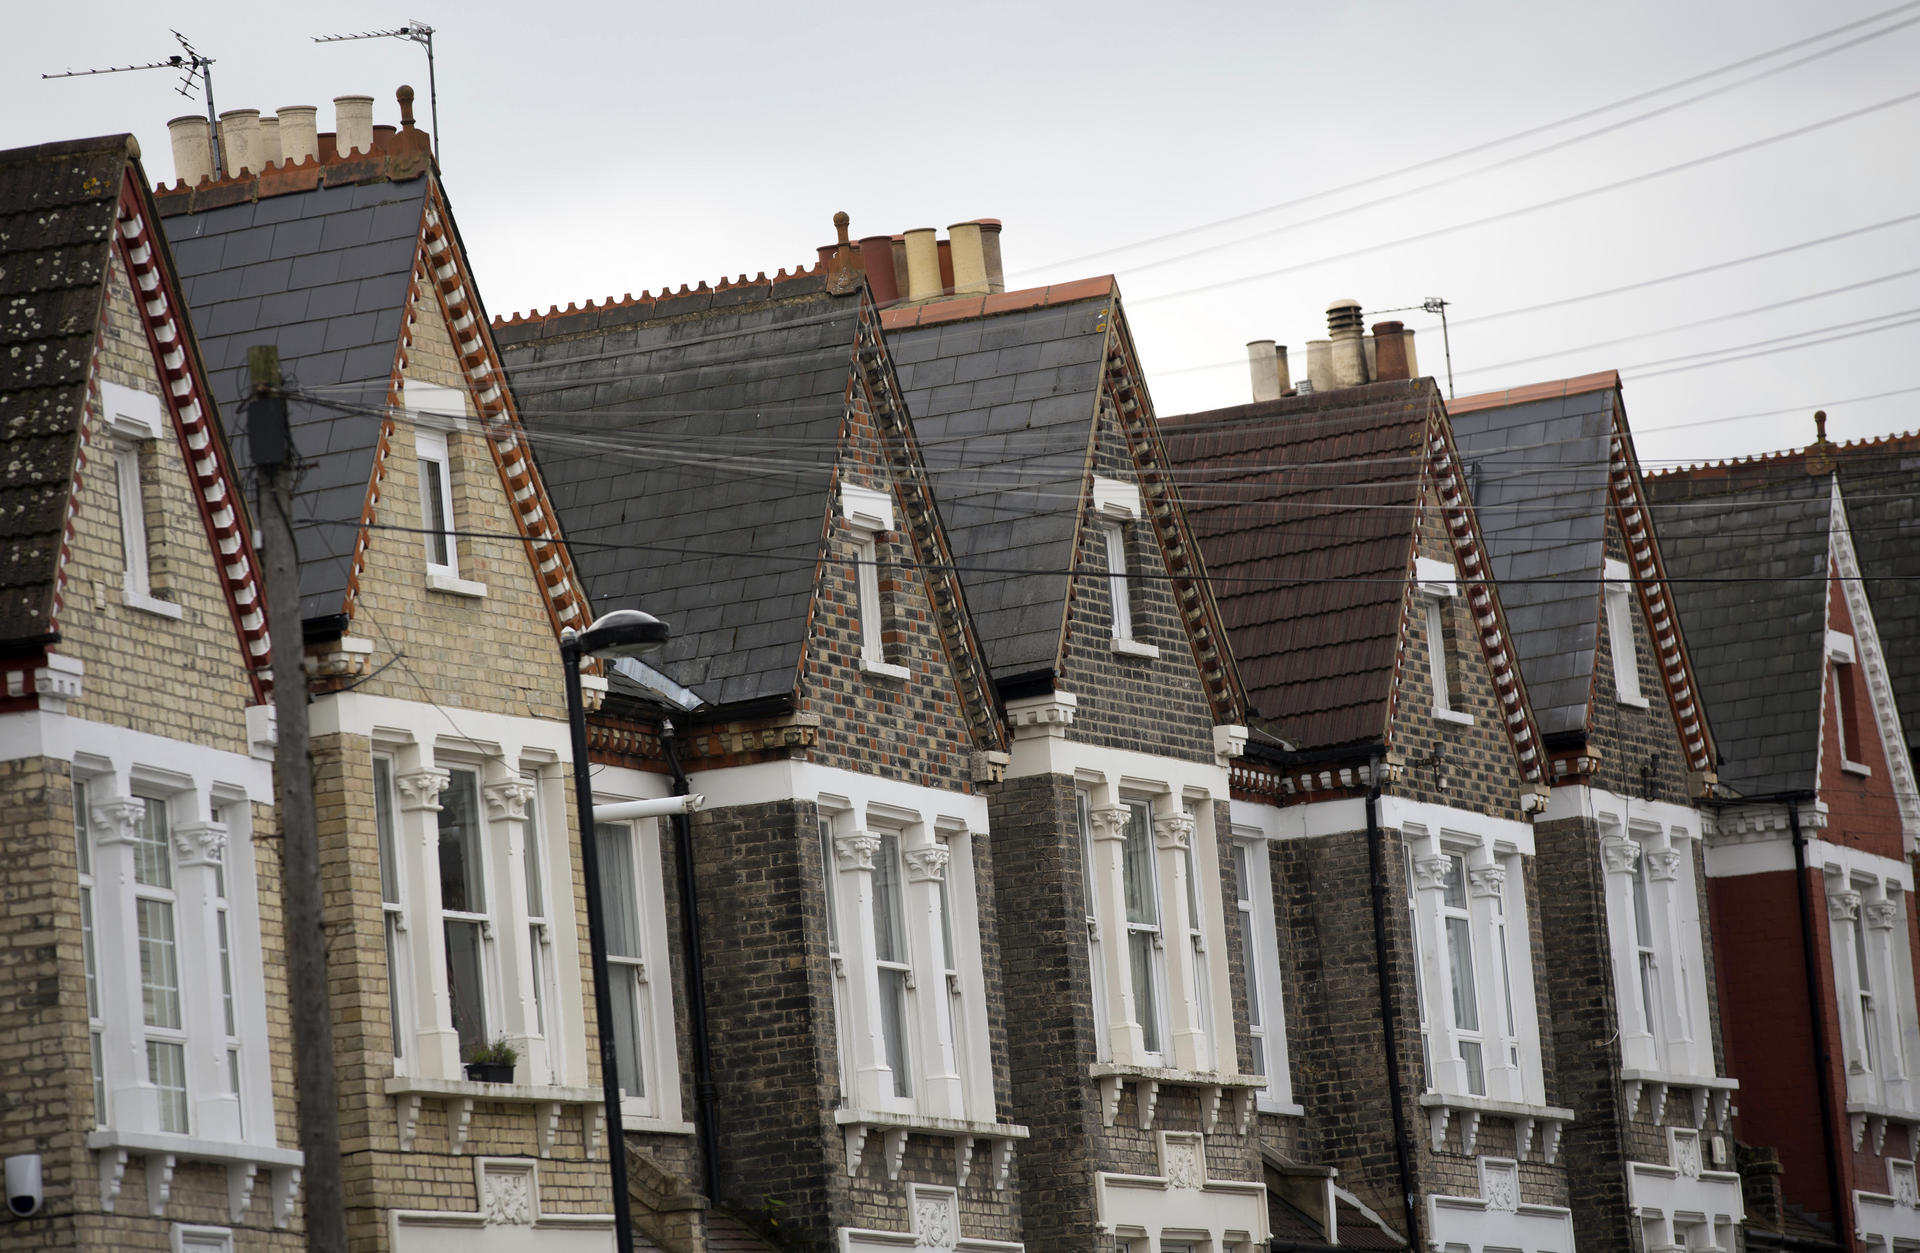 The average price for a London house has fallen to £580,308. Photo: Bloomberg